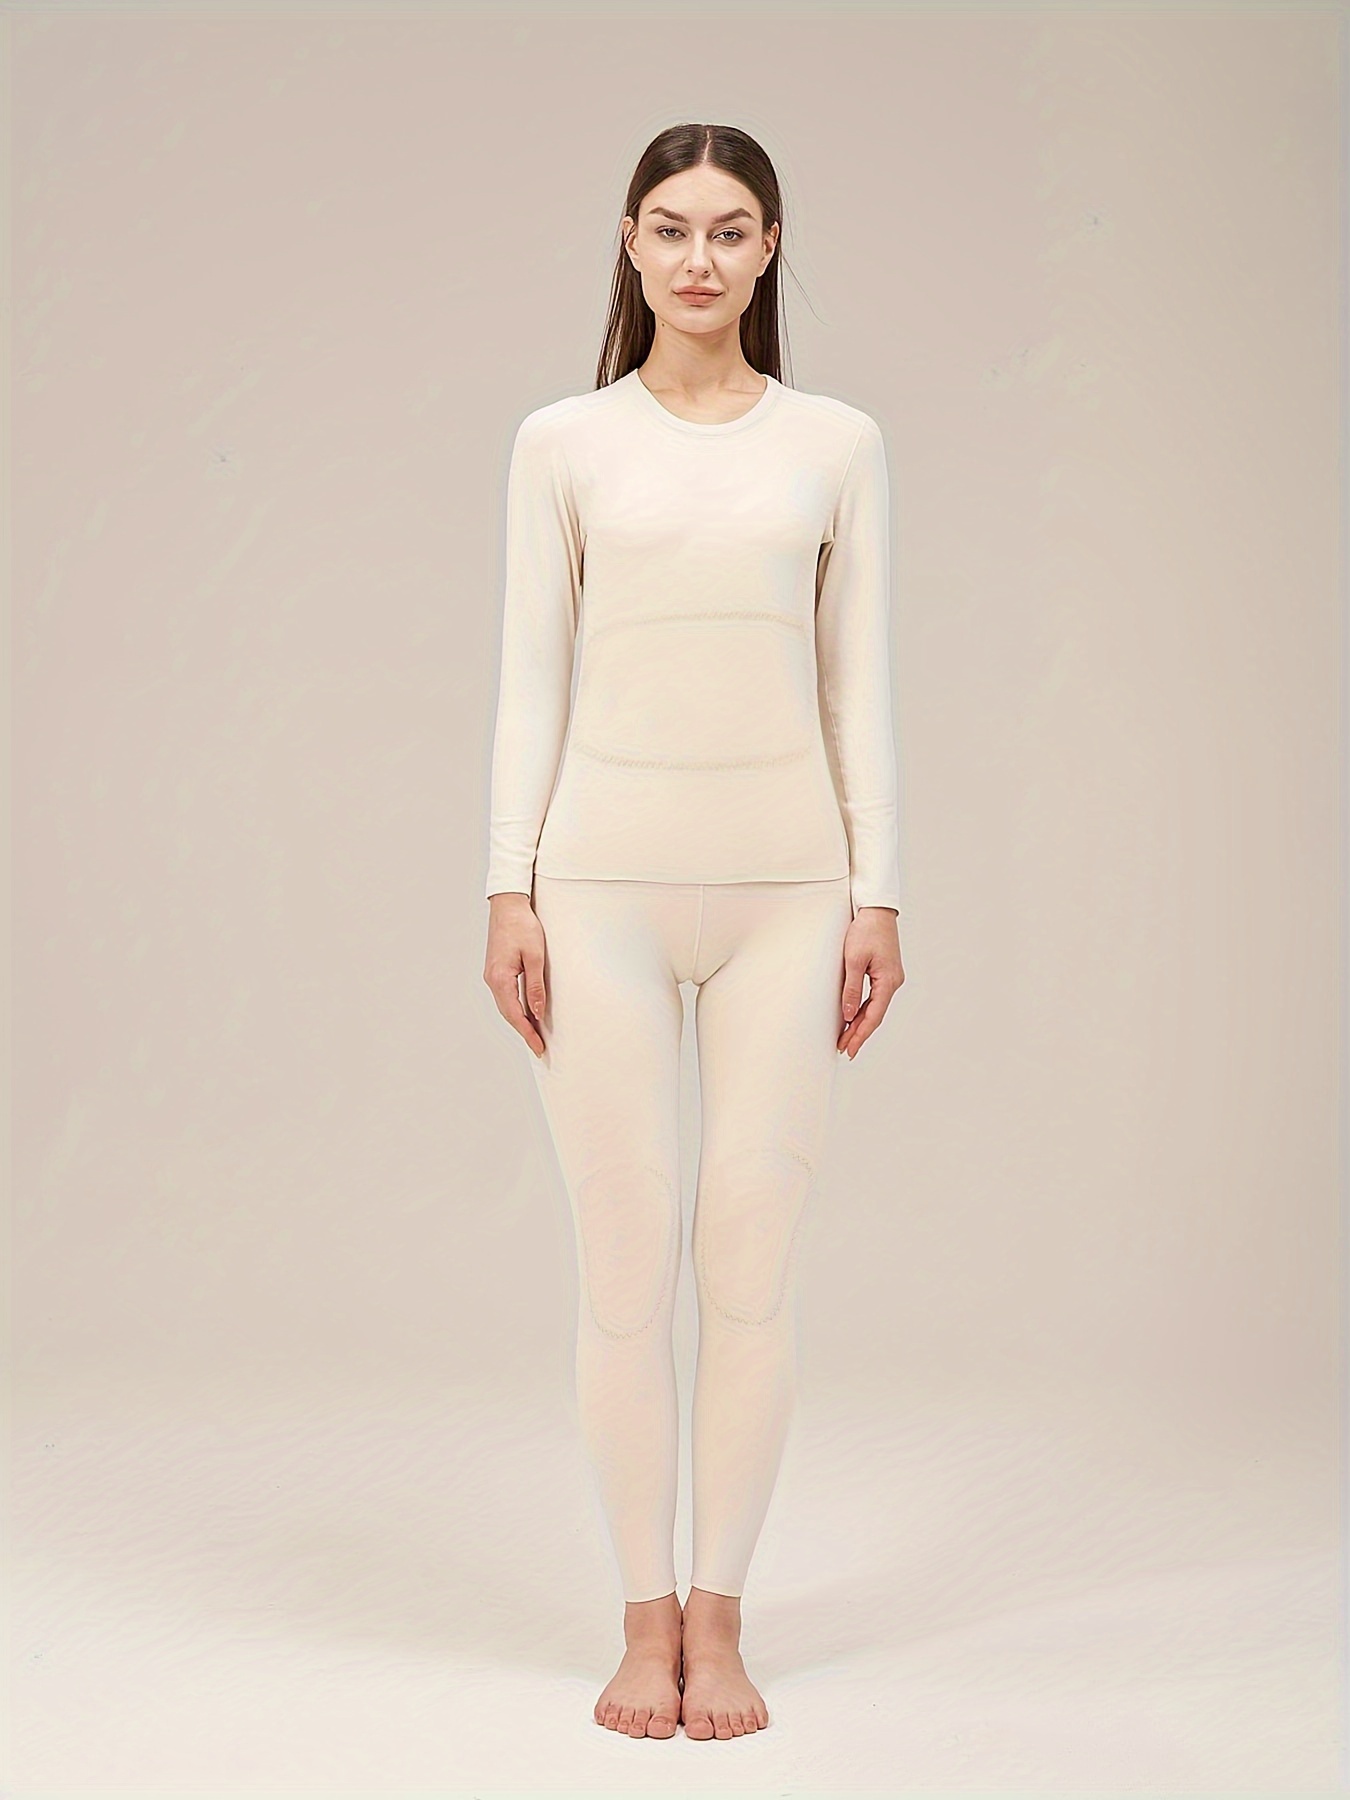 Women's Thermal Underwear Set, Long Sleeve Top And Pants, Keep Warm For  Winter